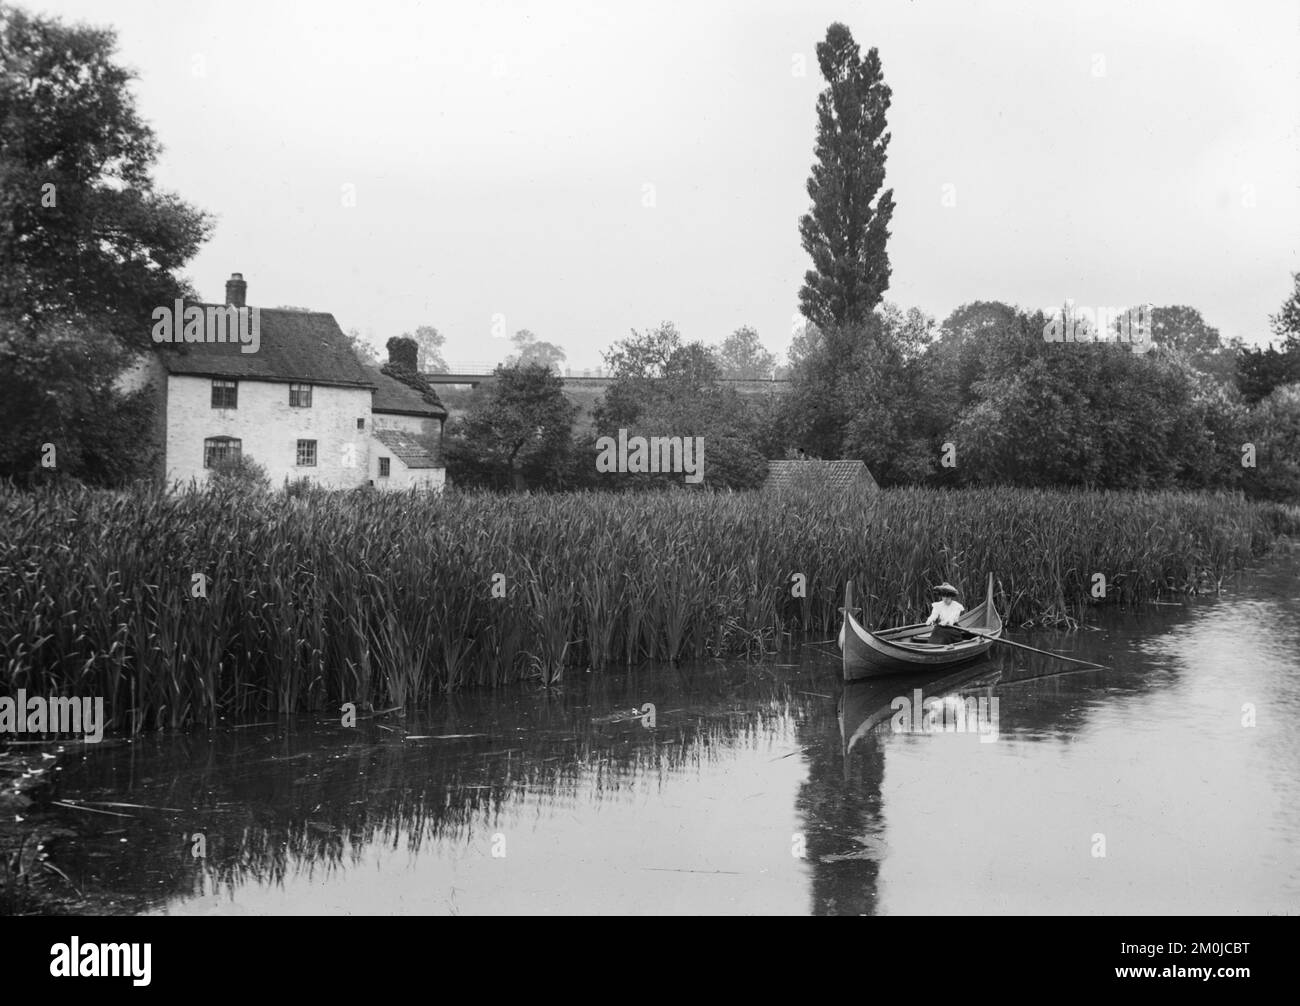 Late 19th century black and white English photograph showing a woman in a rowing boat, on a river, besides some large rushes with a house or cottage nearby. Stock Photo